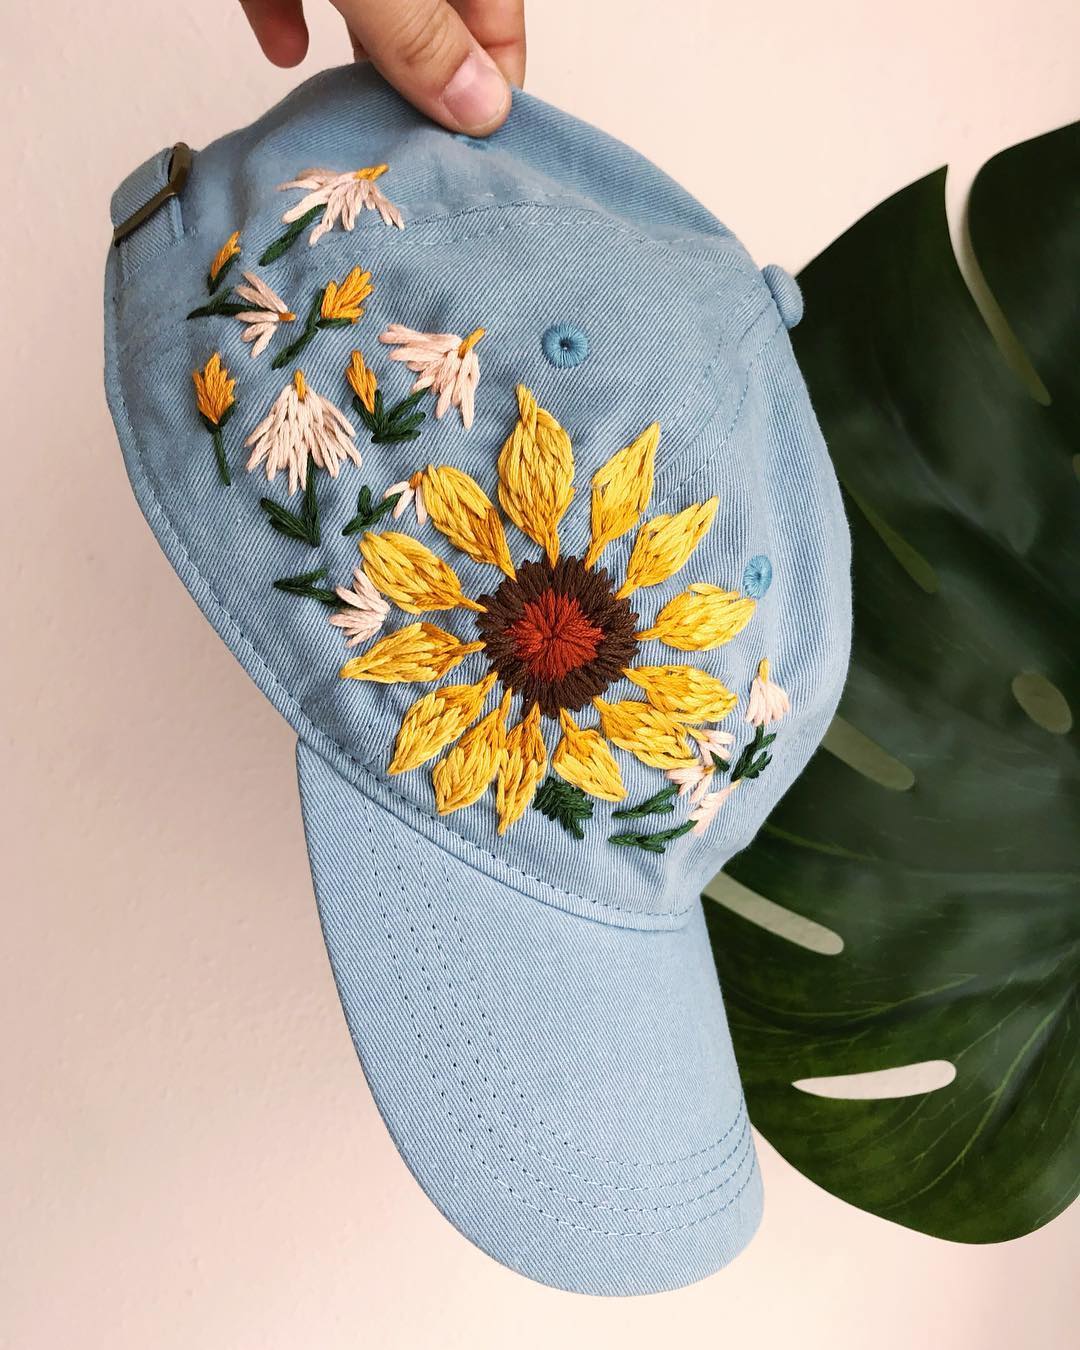 Embroidered Hats Adorned in Beautiful Blooms by Lexi Mire